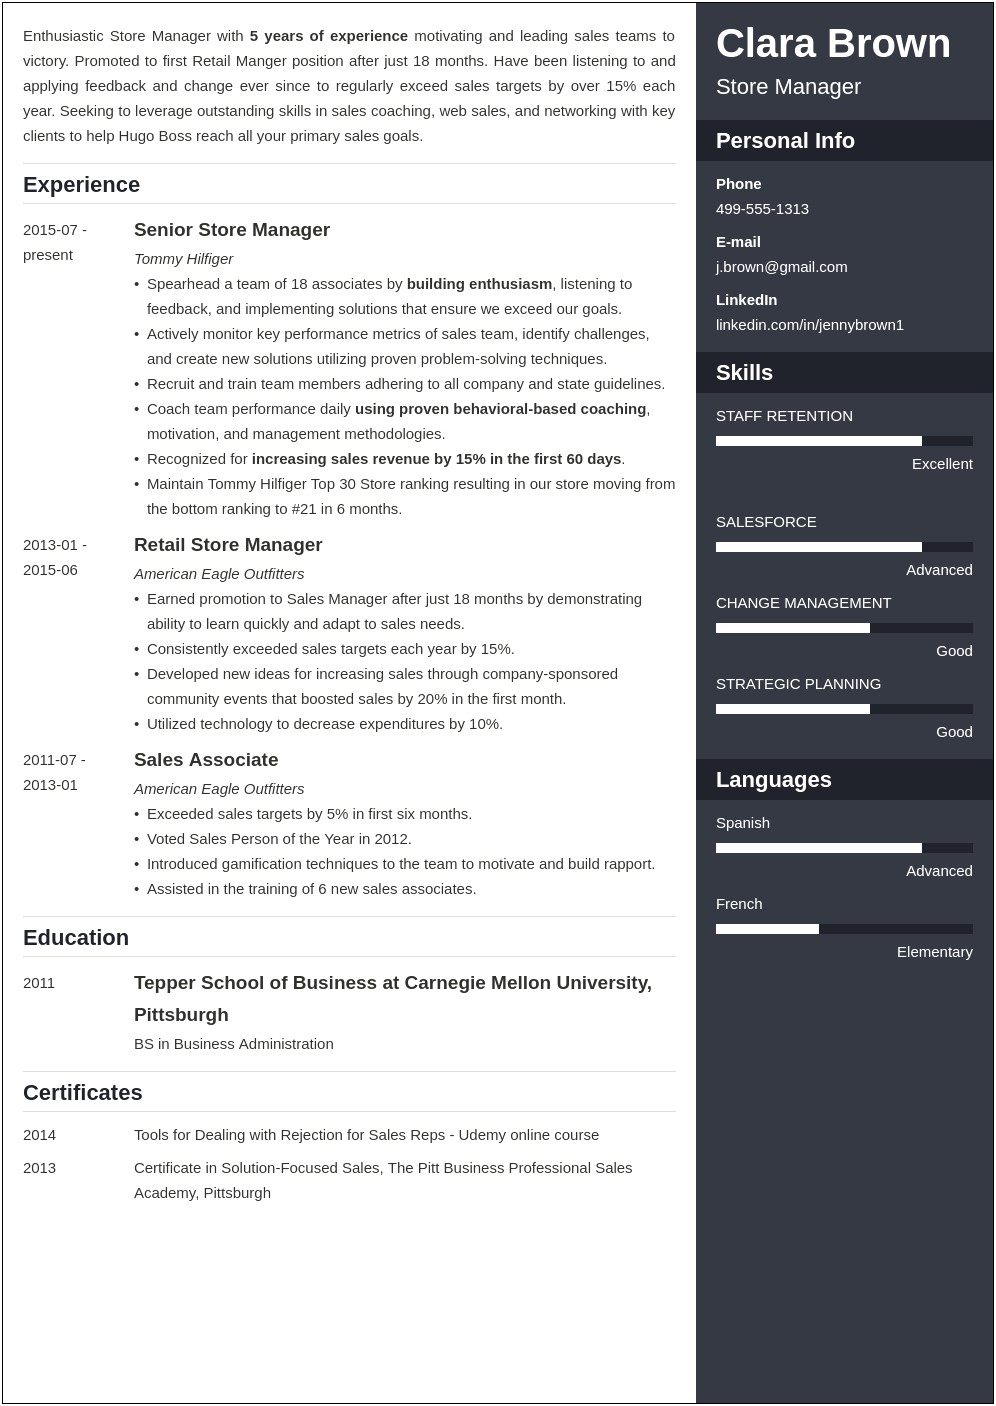 Uscale Retail Store Deartment Manager Resume